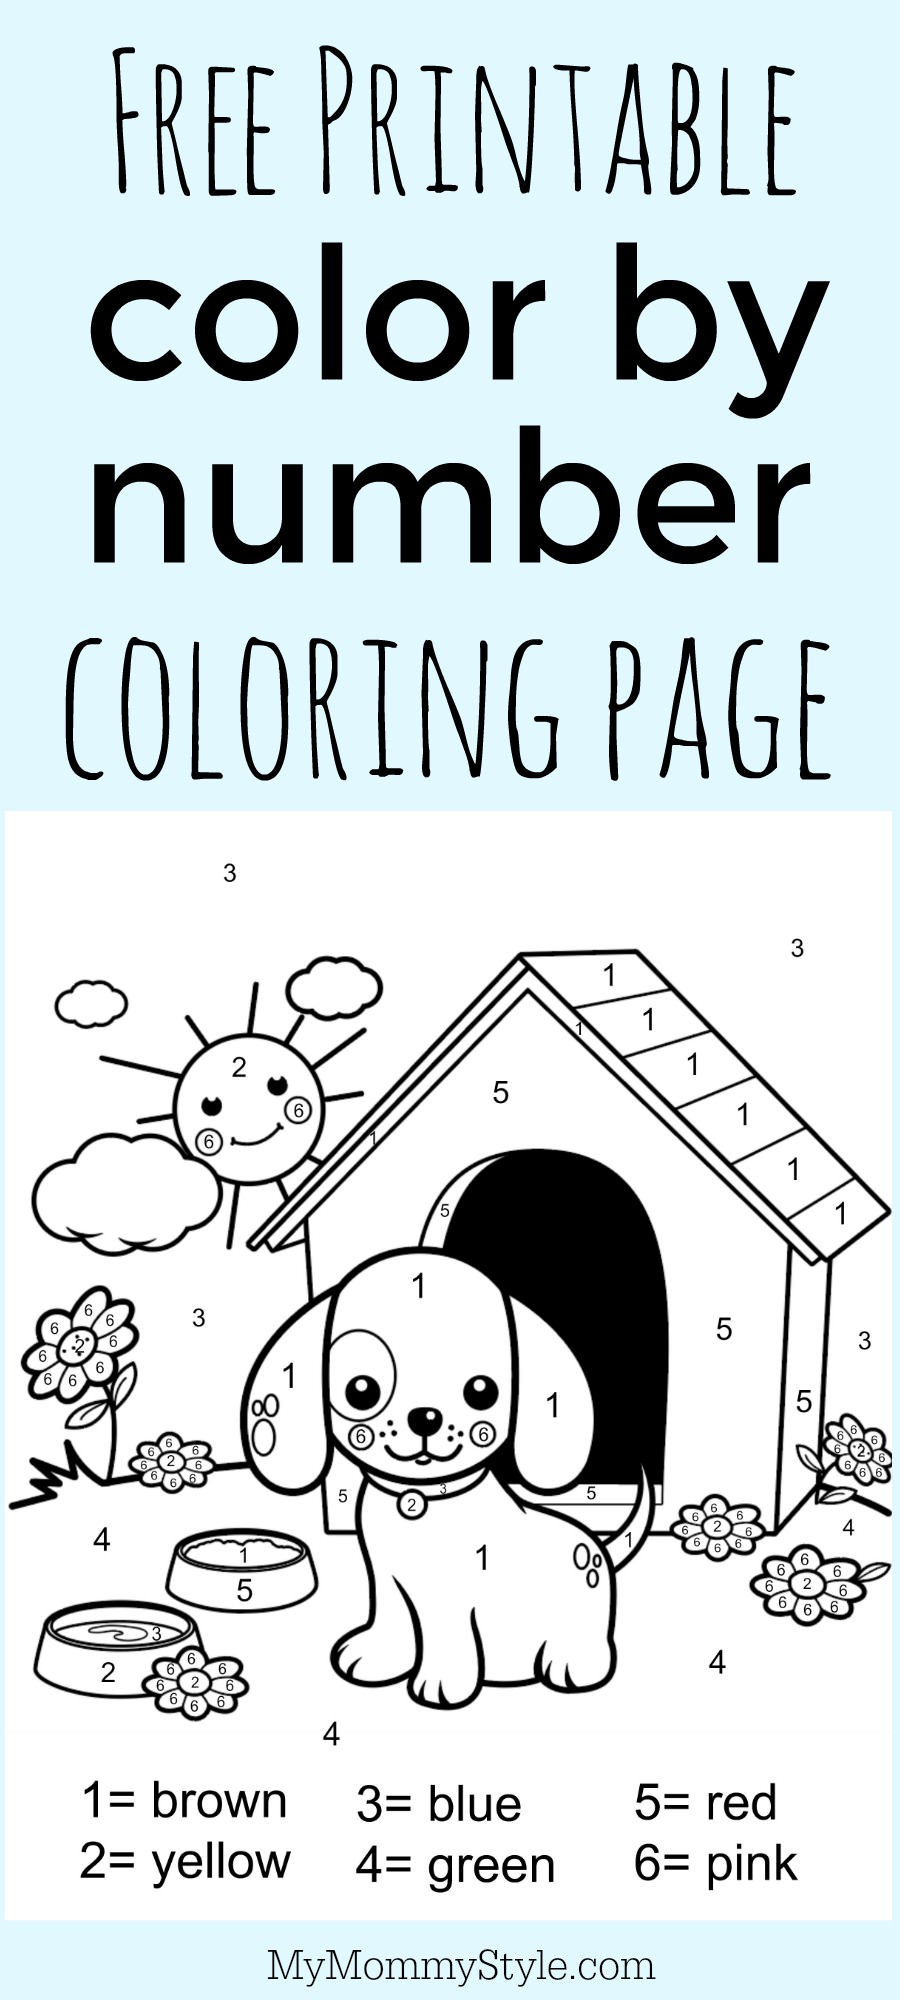 Download Color by number coloring page free printable - My Mommy Style